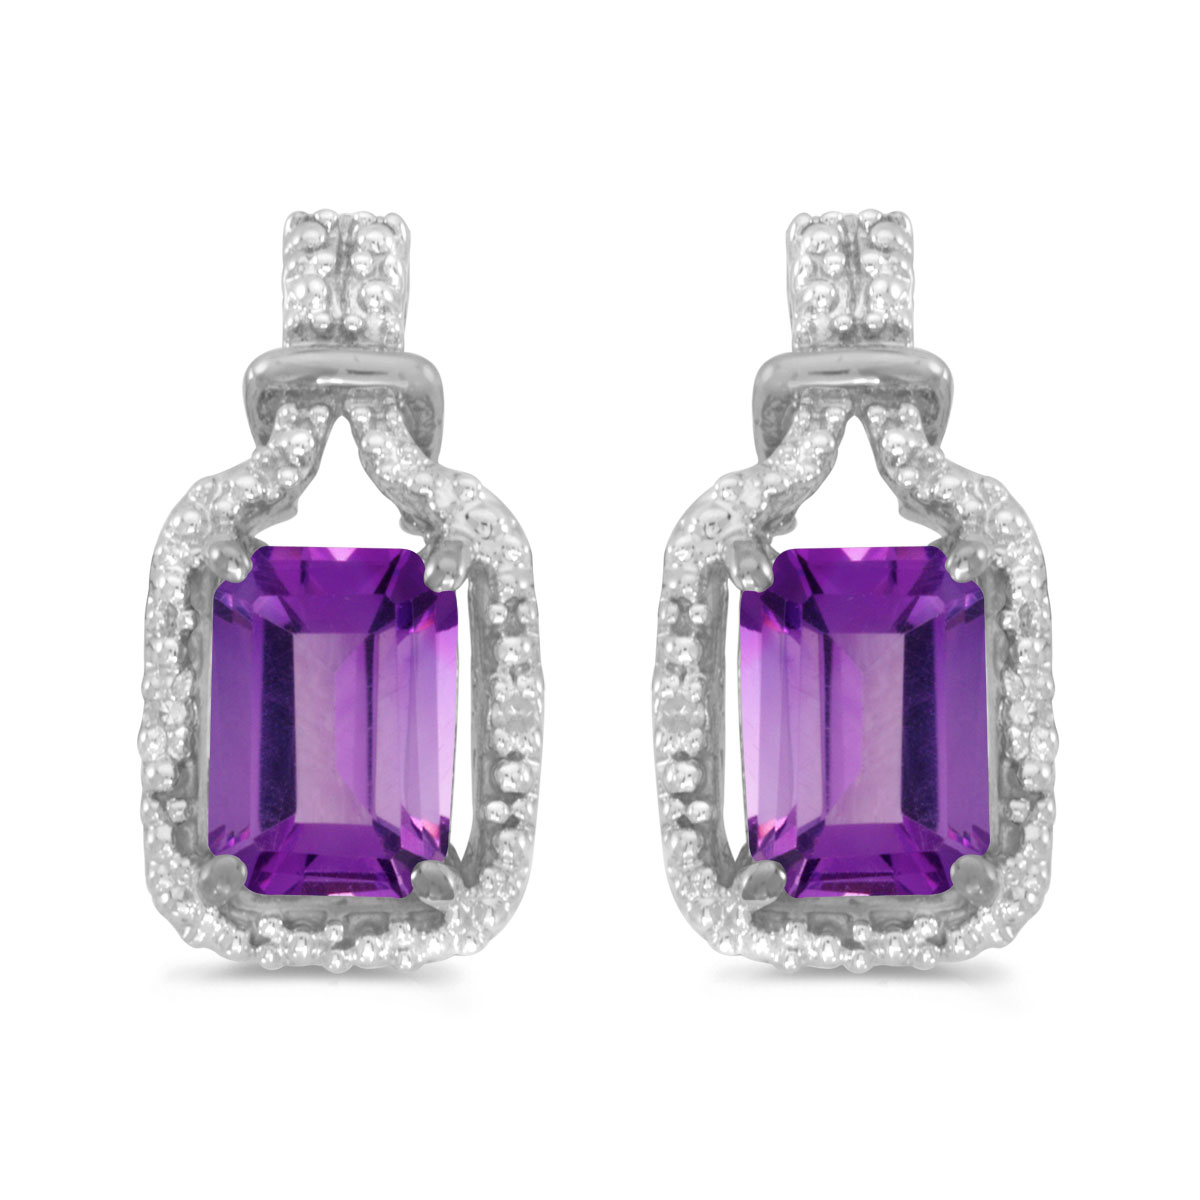 These 14k white gold emerald-cut amethyst and diamond earrings feature 7x5 mm genuine natural amethysts with a 1.54 ct total weight and sparkling diamond accents.